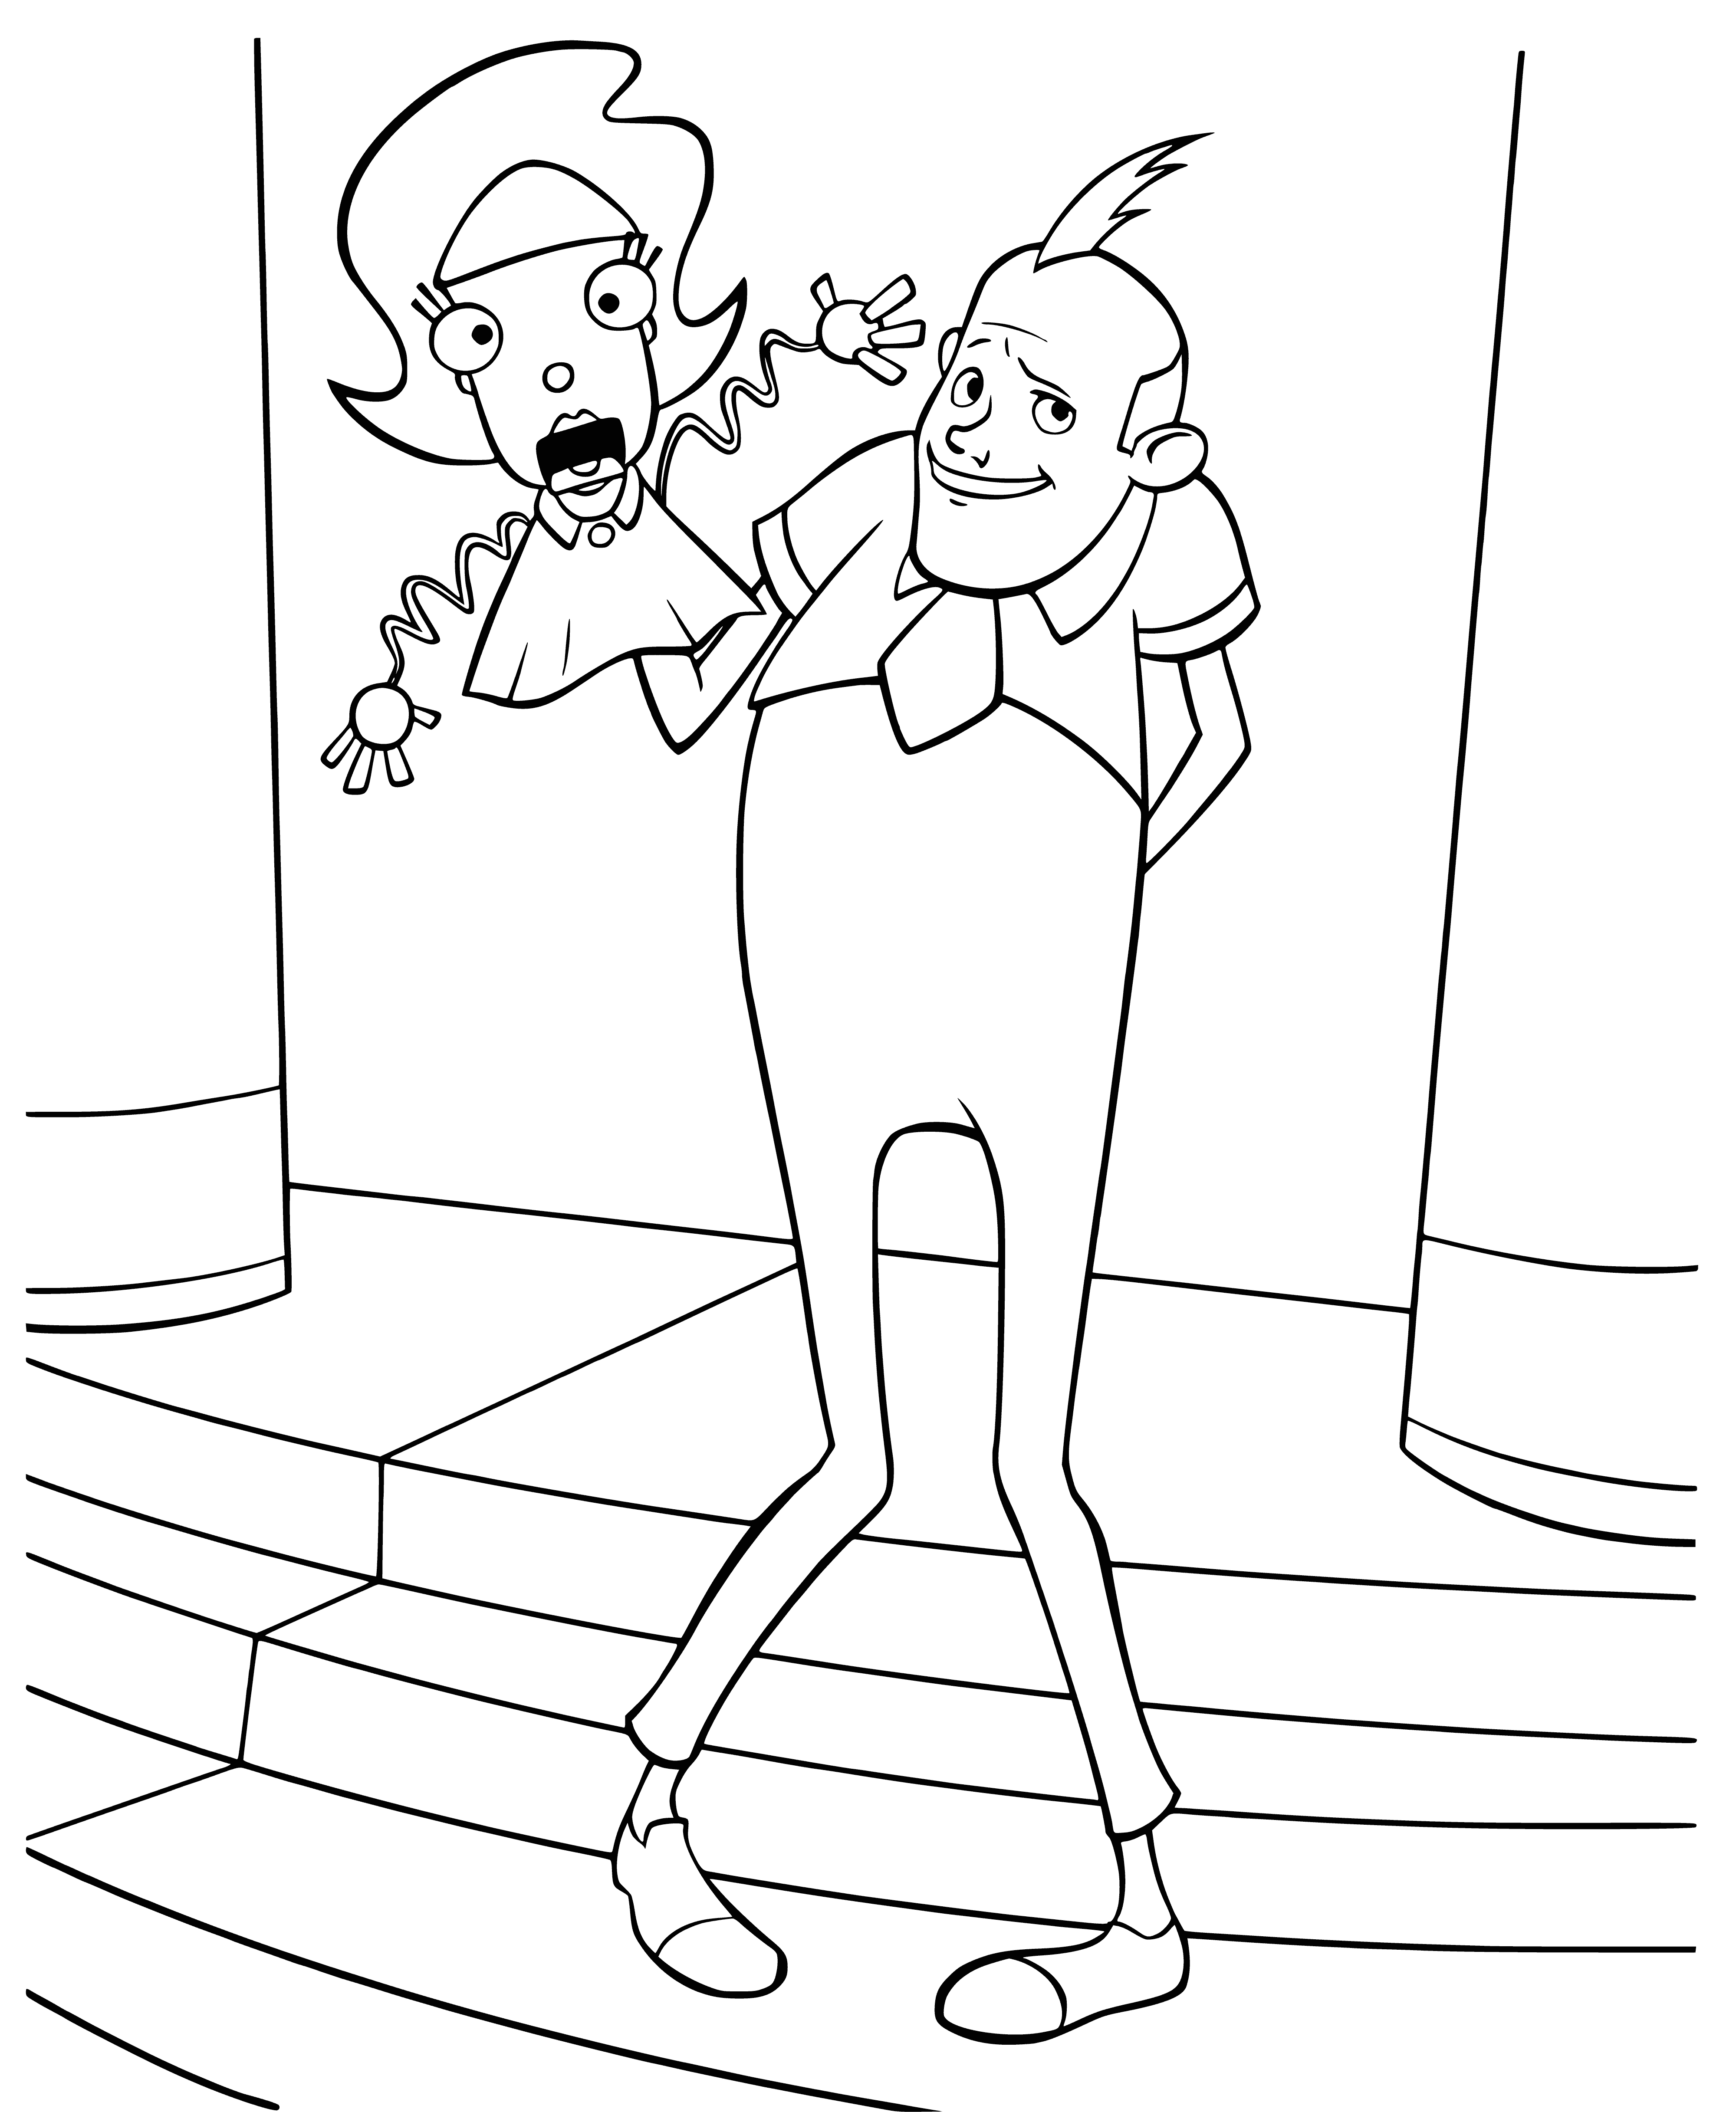 Ventriloquist coloring page